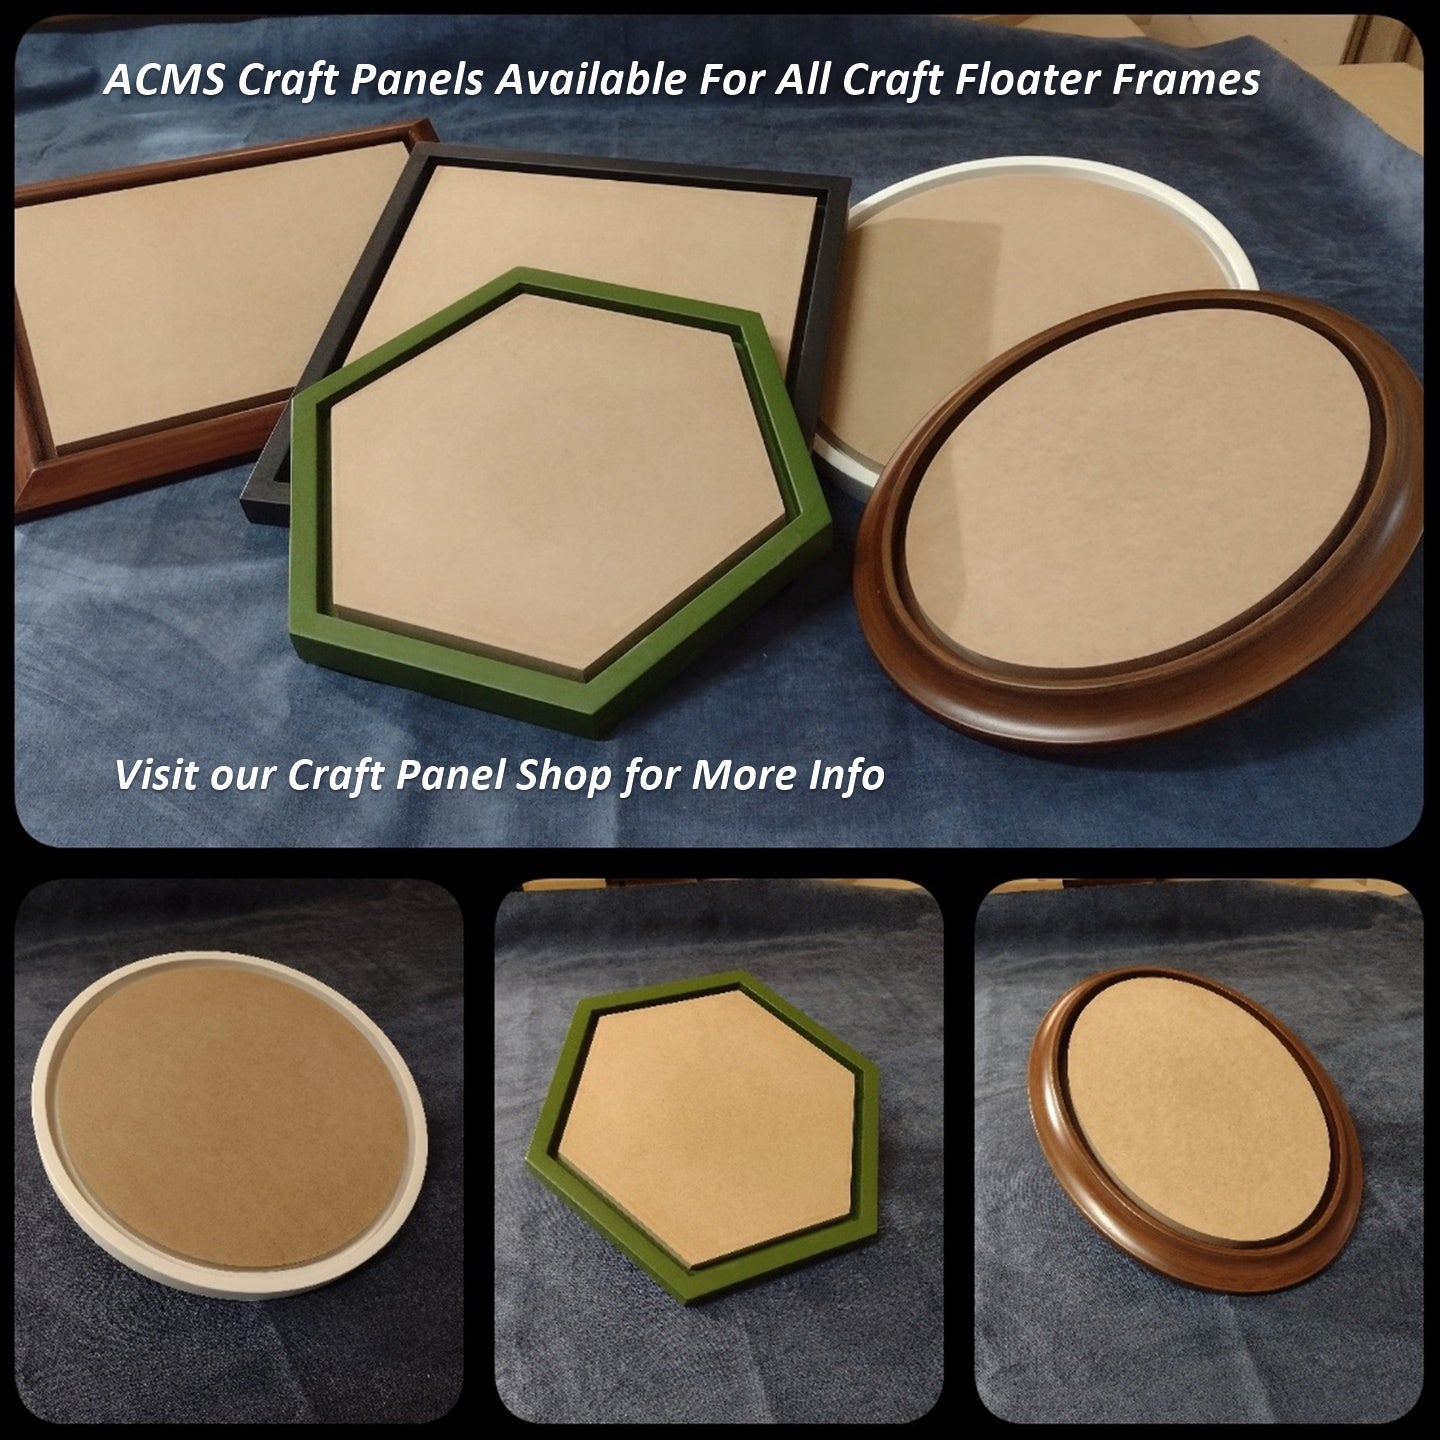 Oval Craft Floater Frame - FLAT 1 1/4" Profile - 1 1/4" Thick